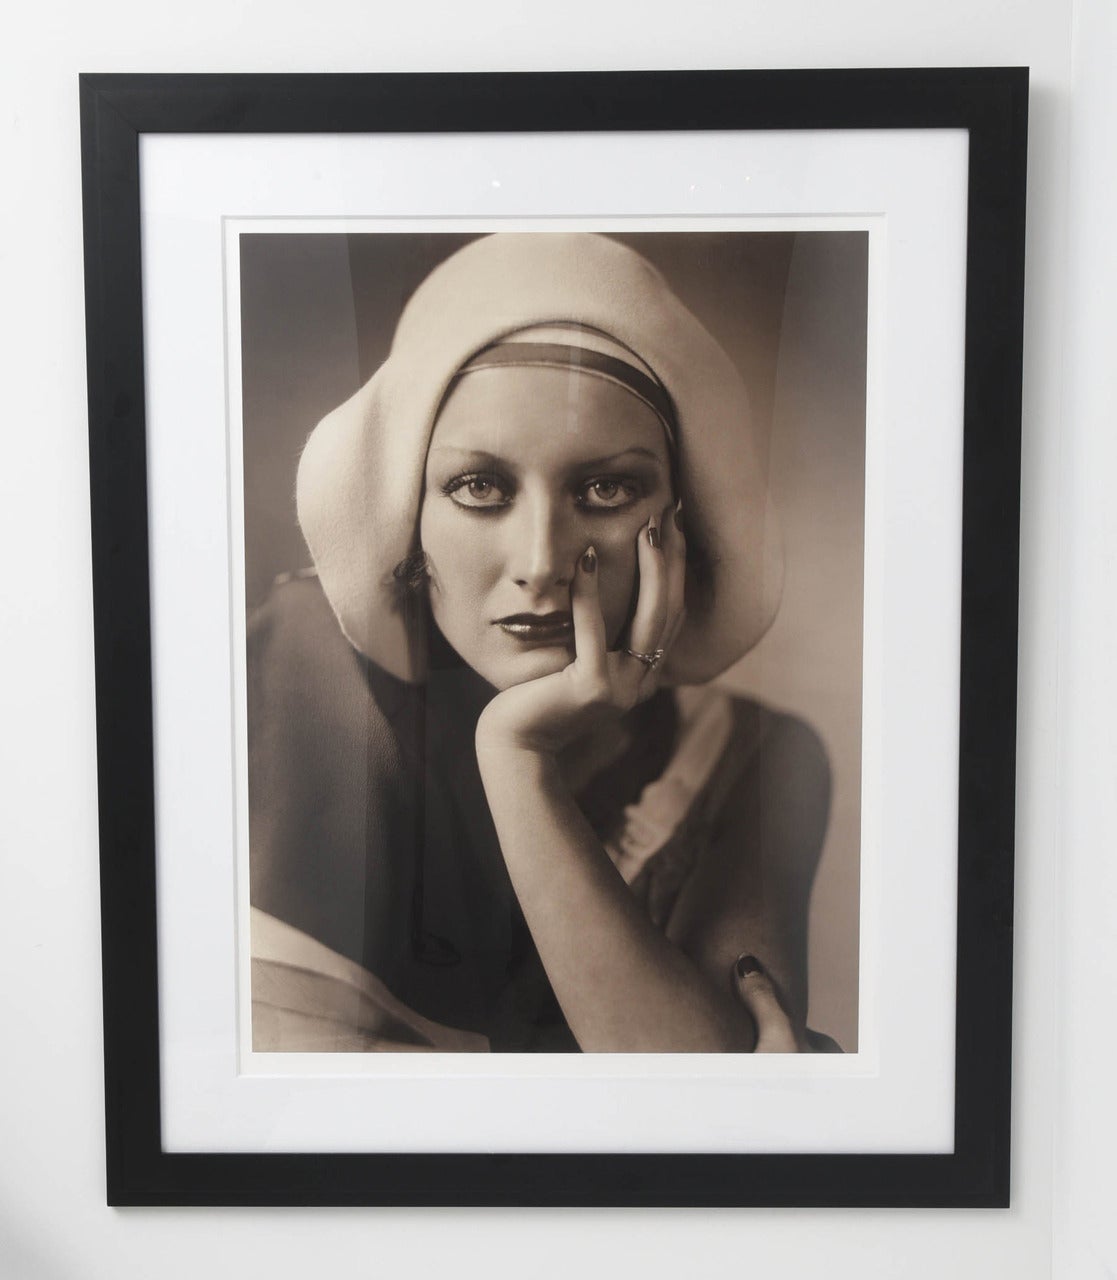 Framed archival pigment print of Joan Crawford (1935) by George Hurrell. Produced under the authority of the Hurell Estate Collection, LLC this print is part of a limited edition seriesThis iconic photograph of the Hollywood actress Jean Harlow was